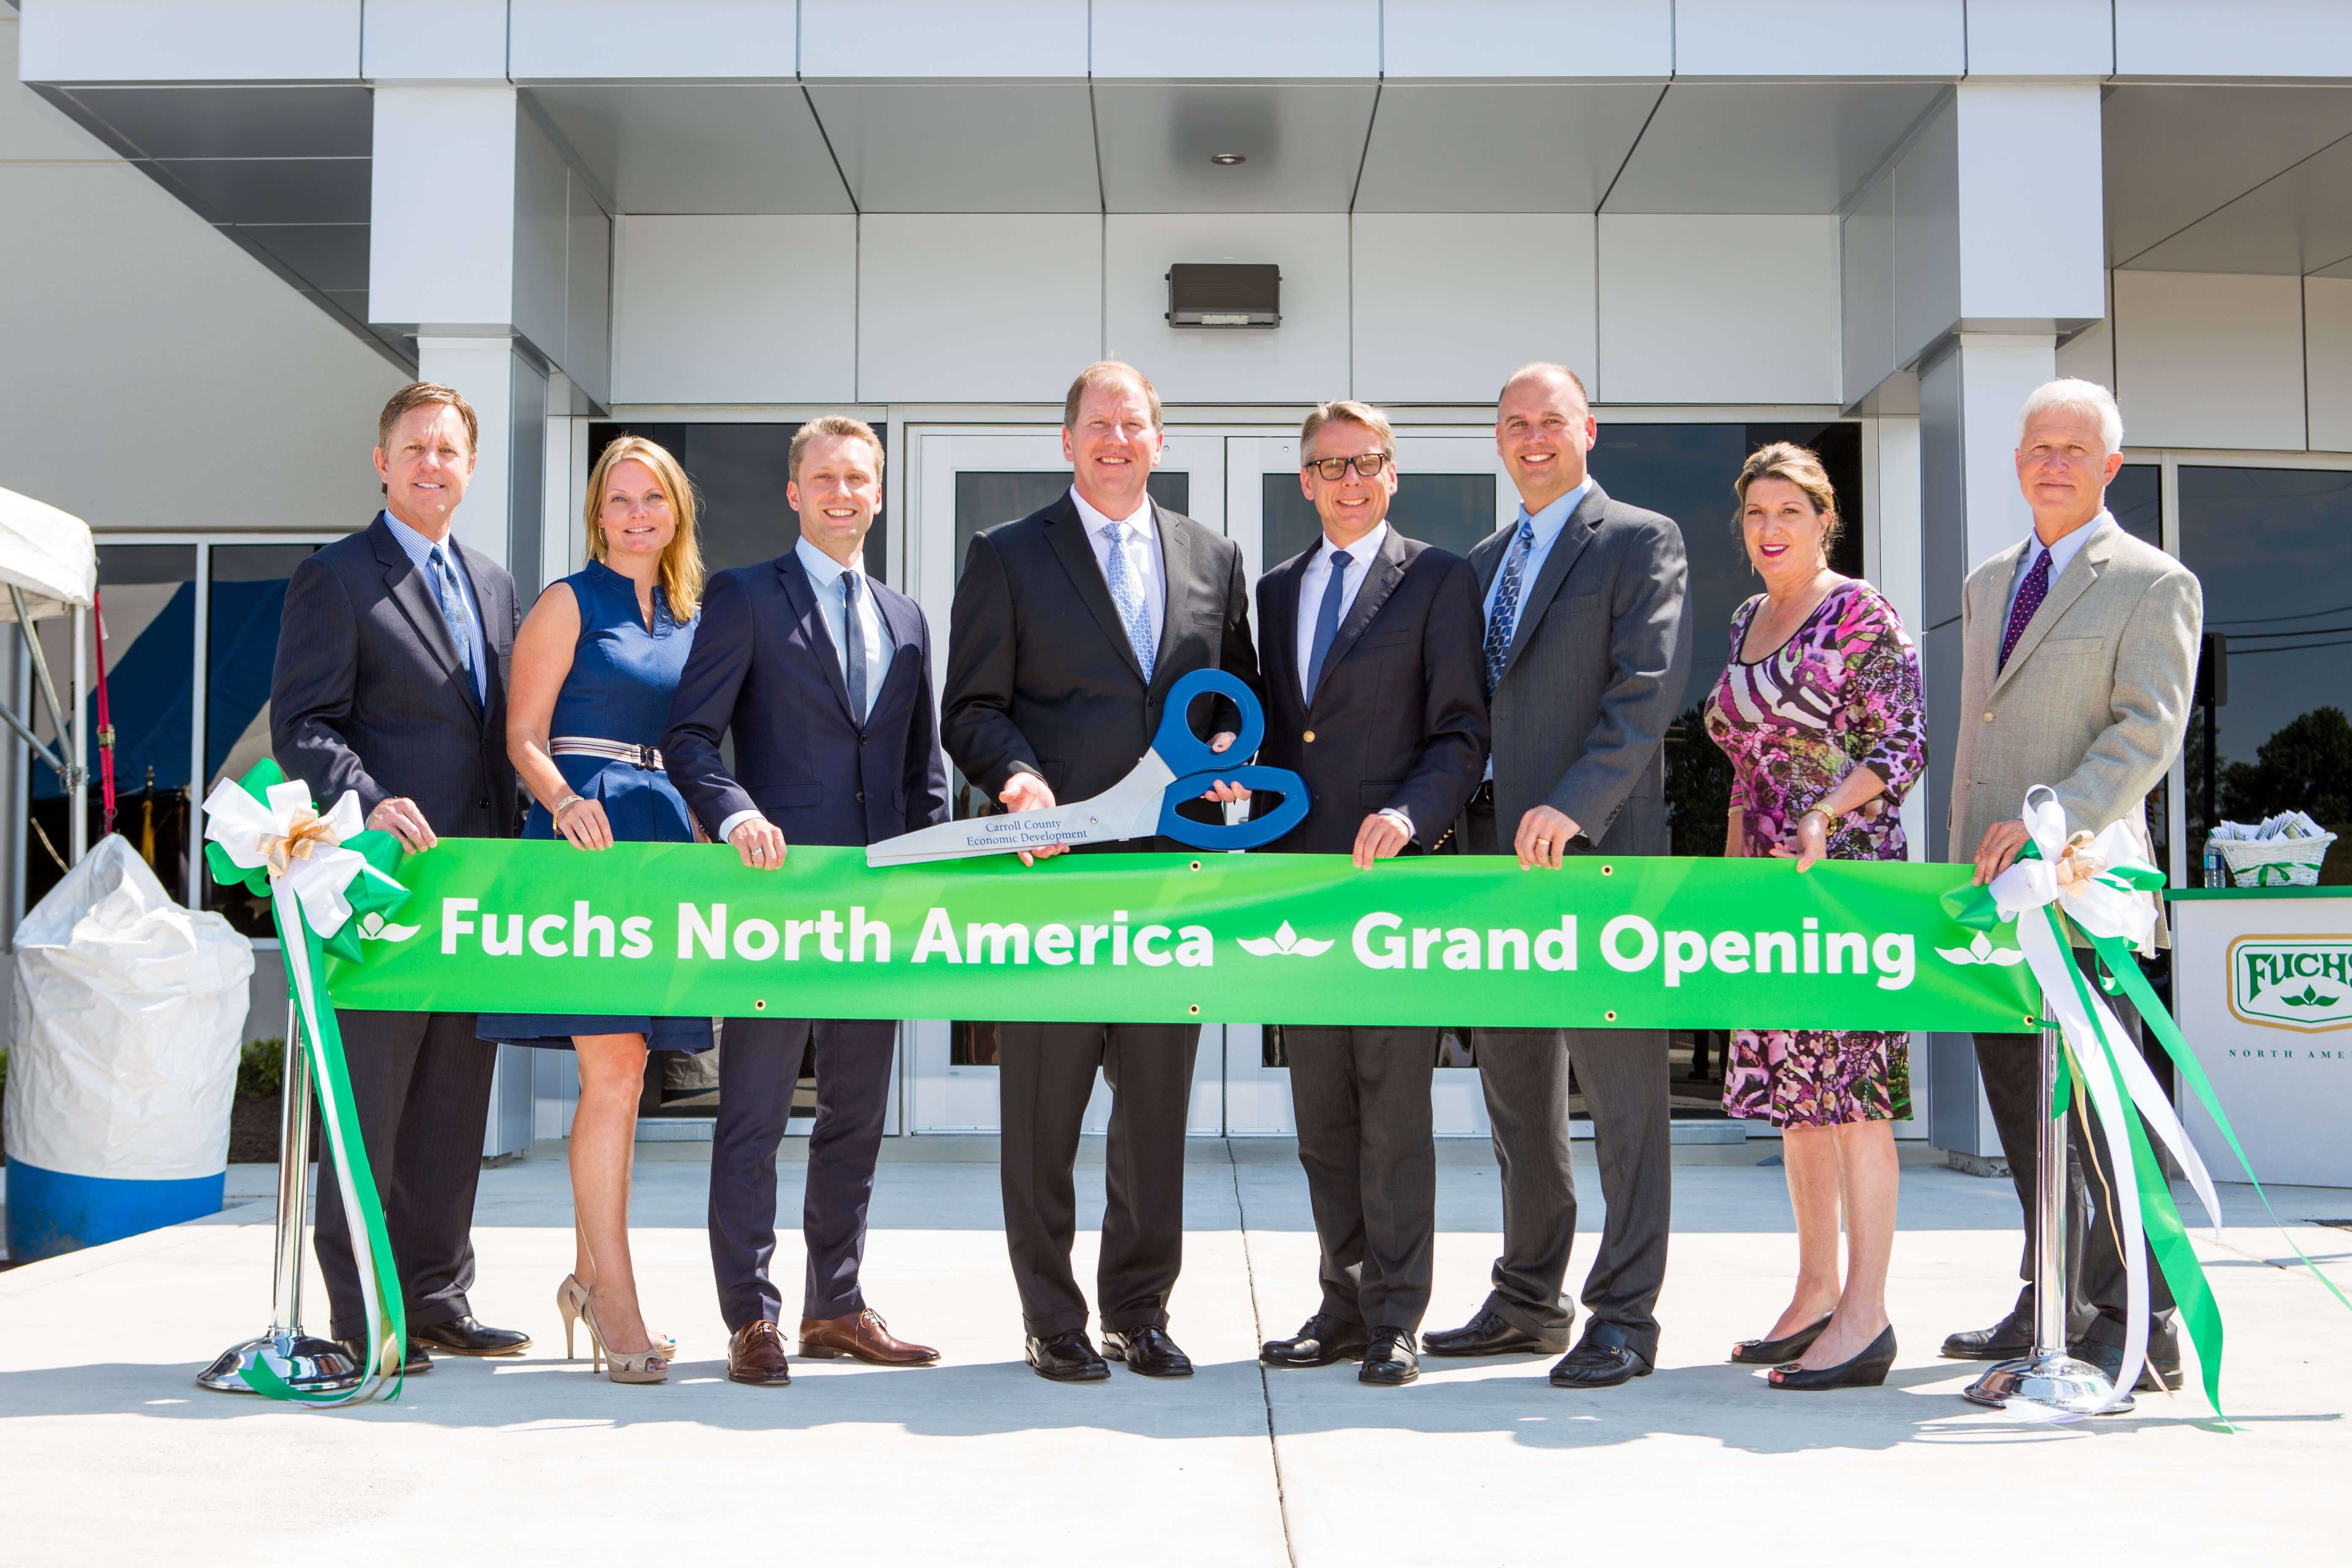 Fuchs North America Holds Grand Opening Ceremony for New Headquarters Facilities